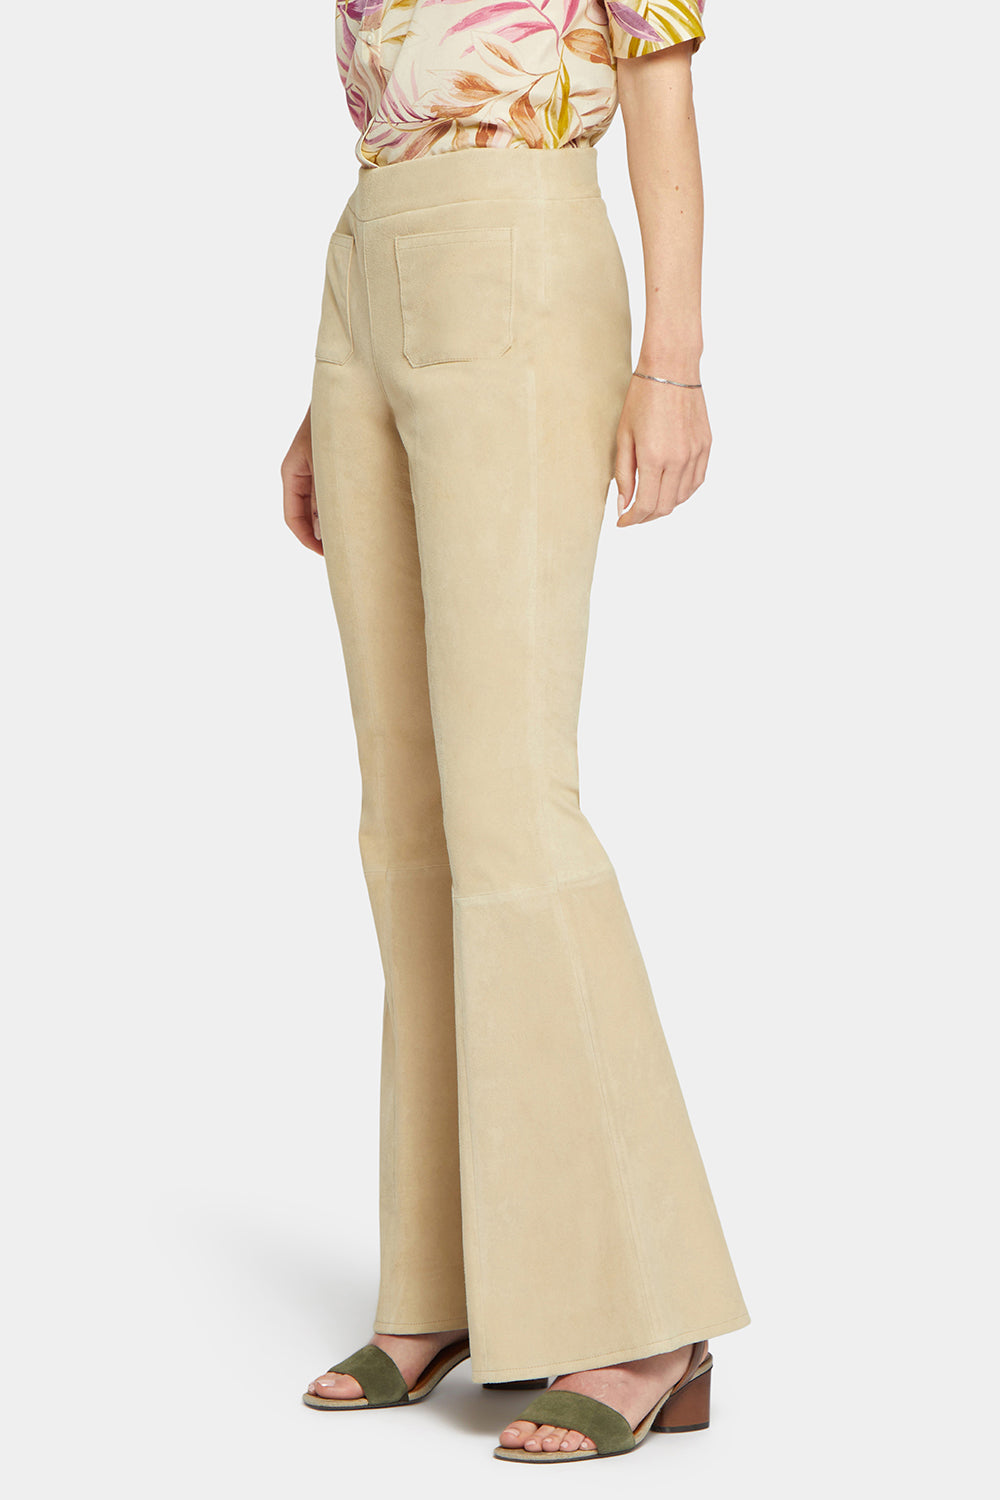 PREORDER Throwback Tan Suede Flare Pants